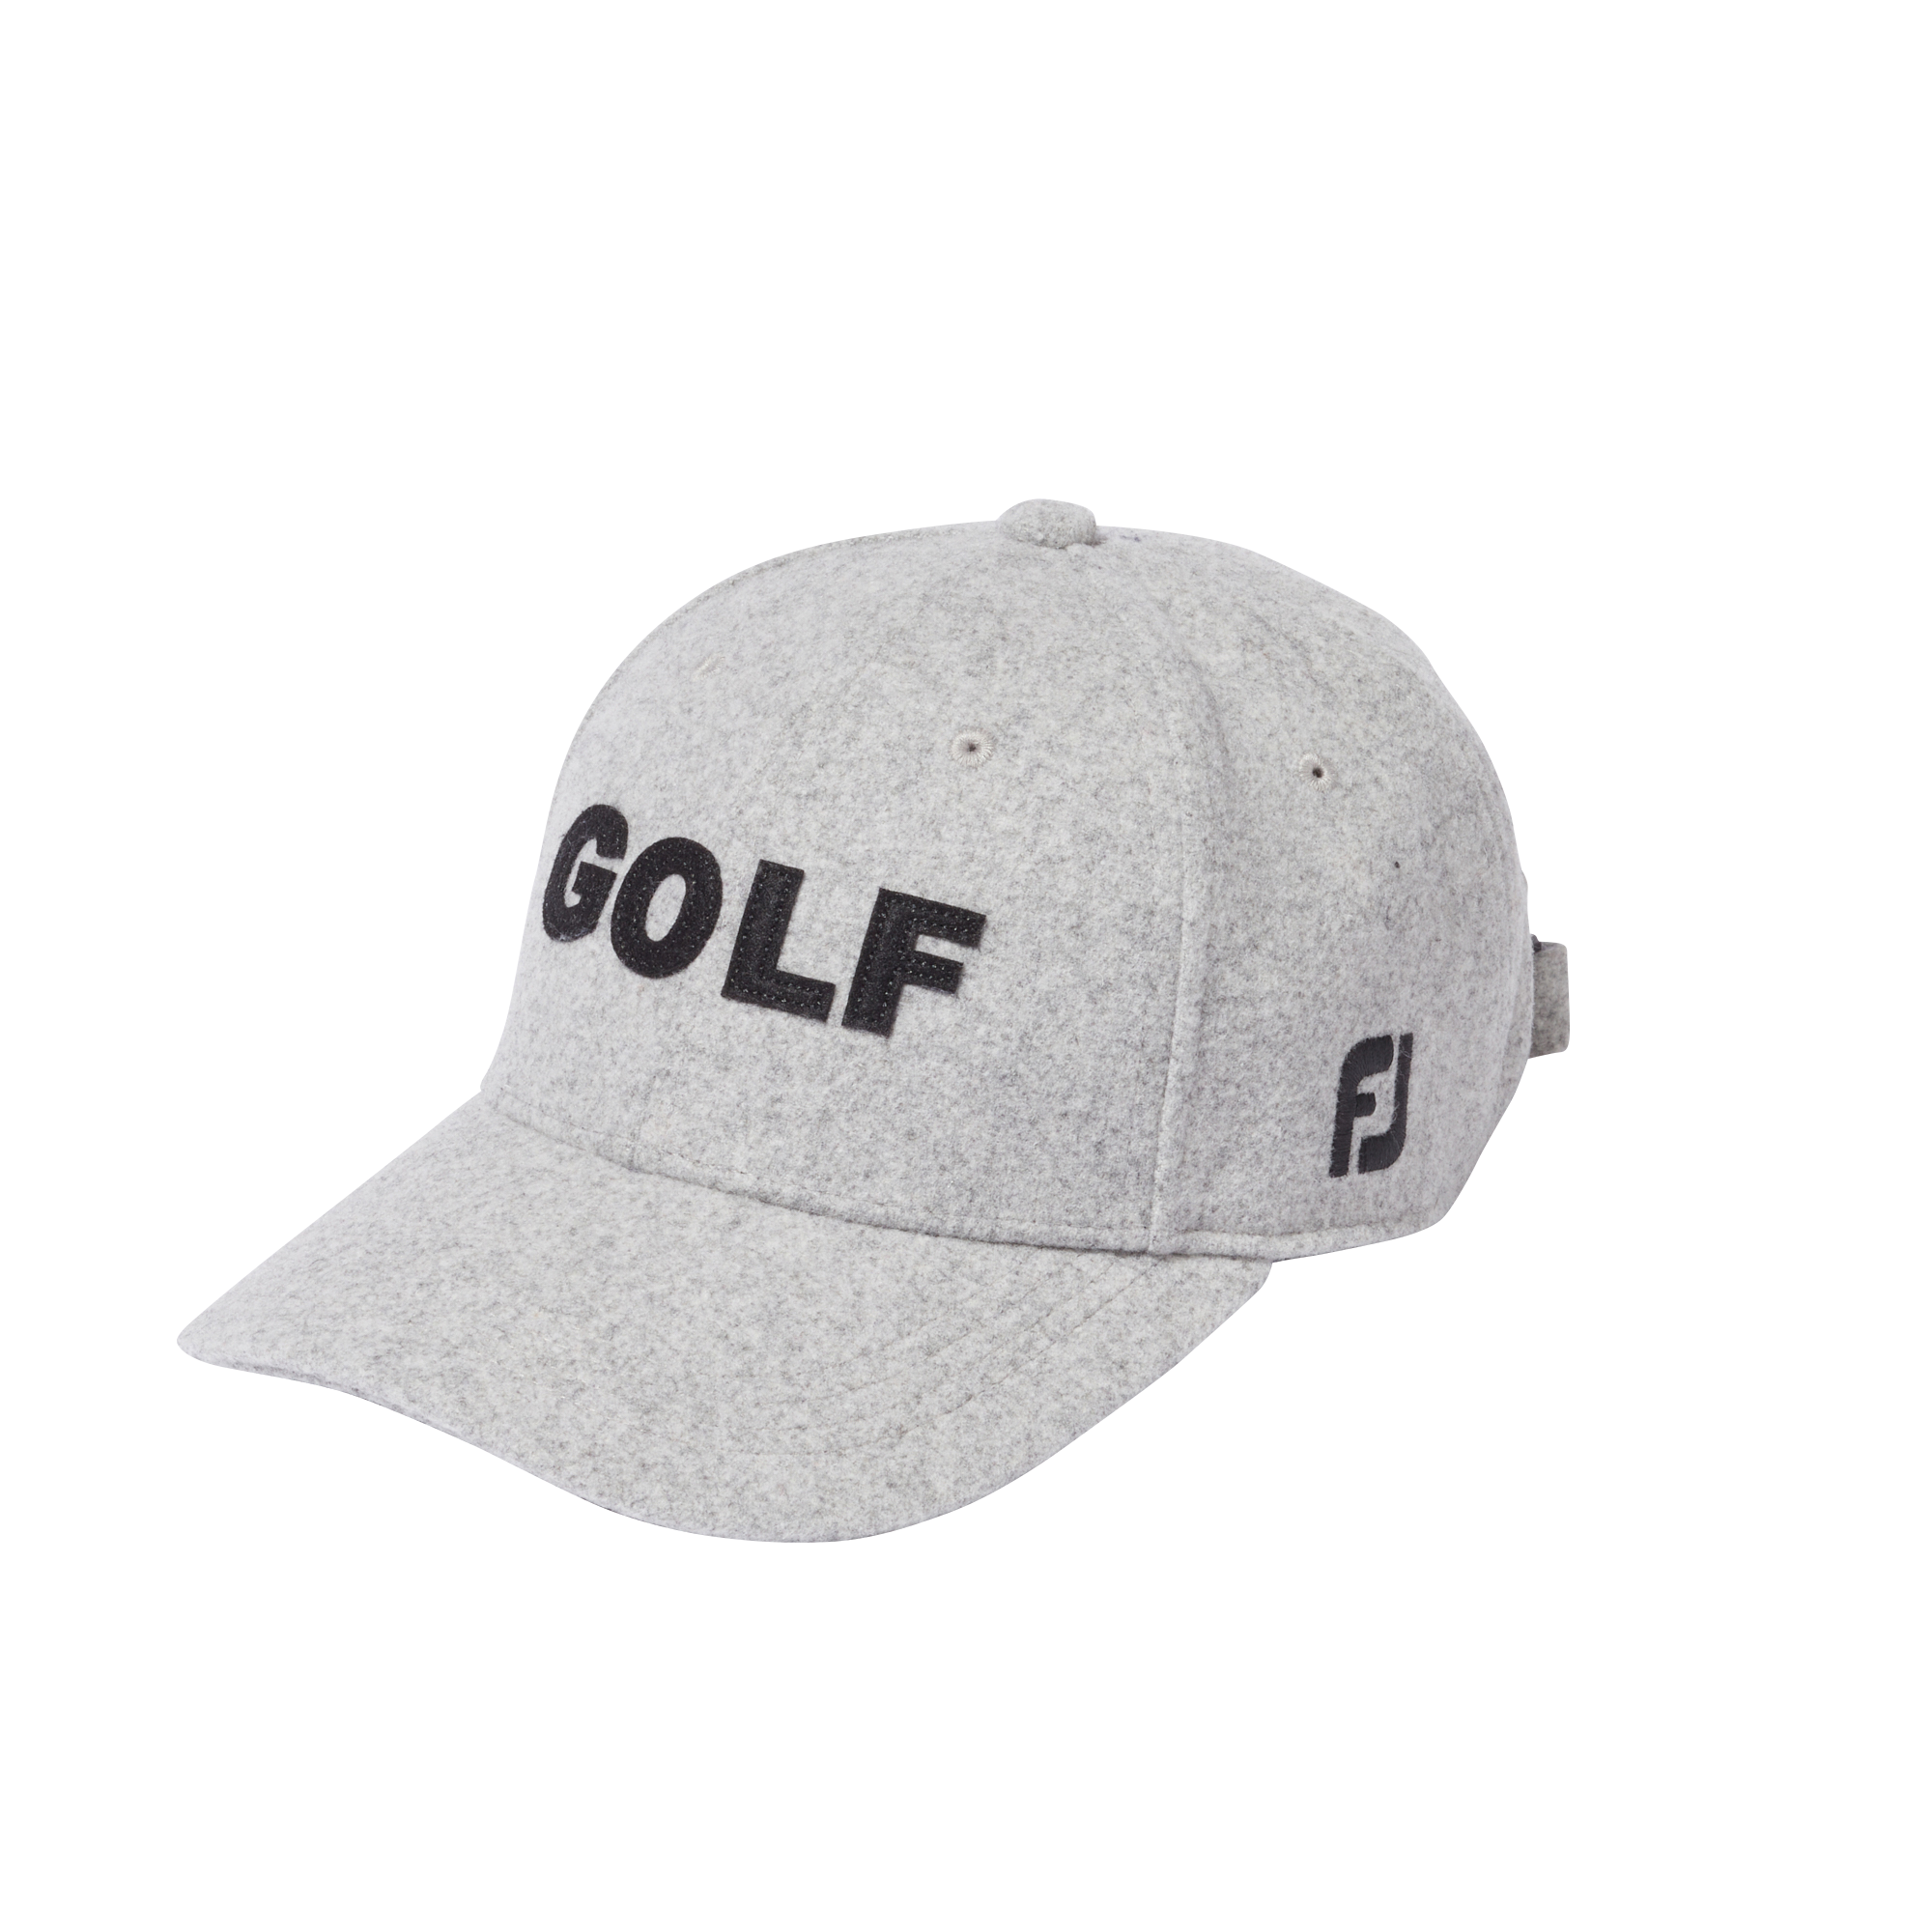 Golf Hats, Beanies, and More | FootJoy